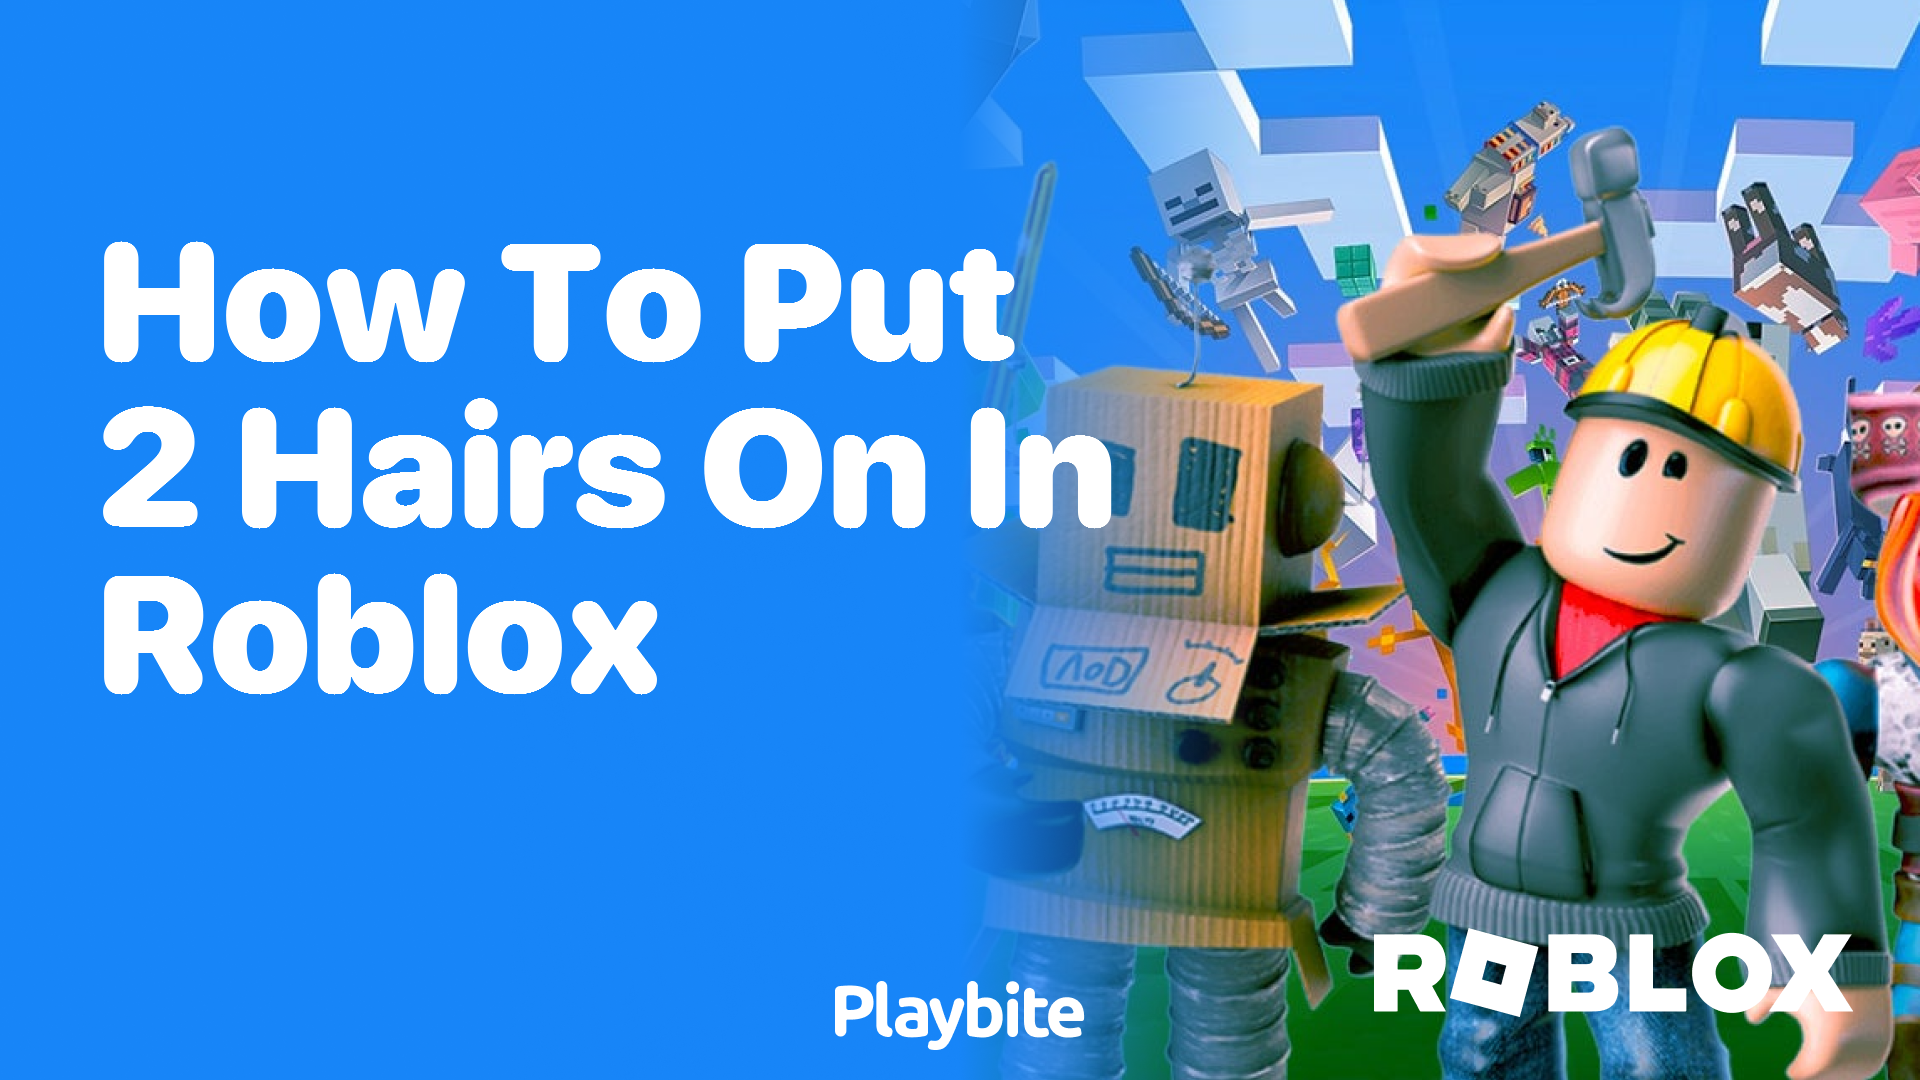 How To Put 2 Hairs On In Roblox Playbite